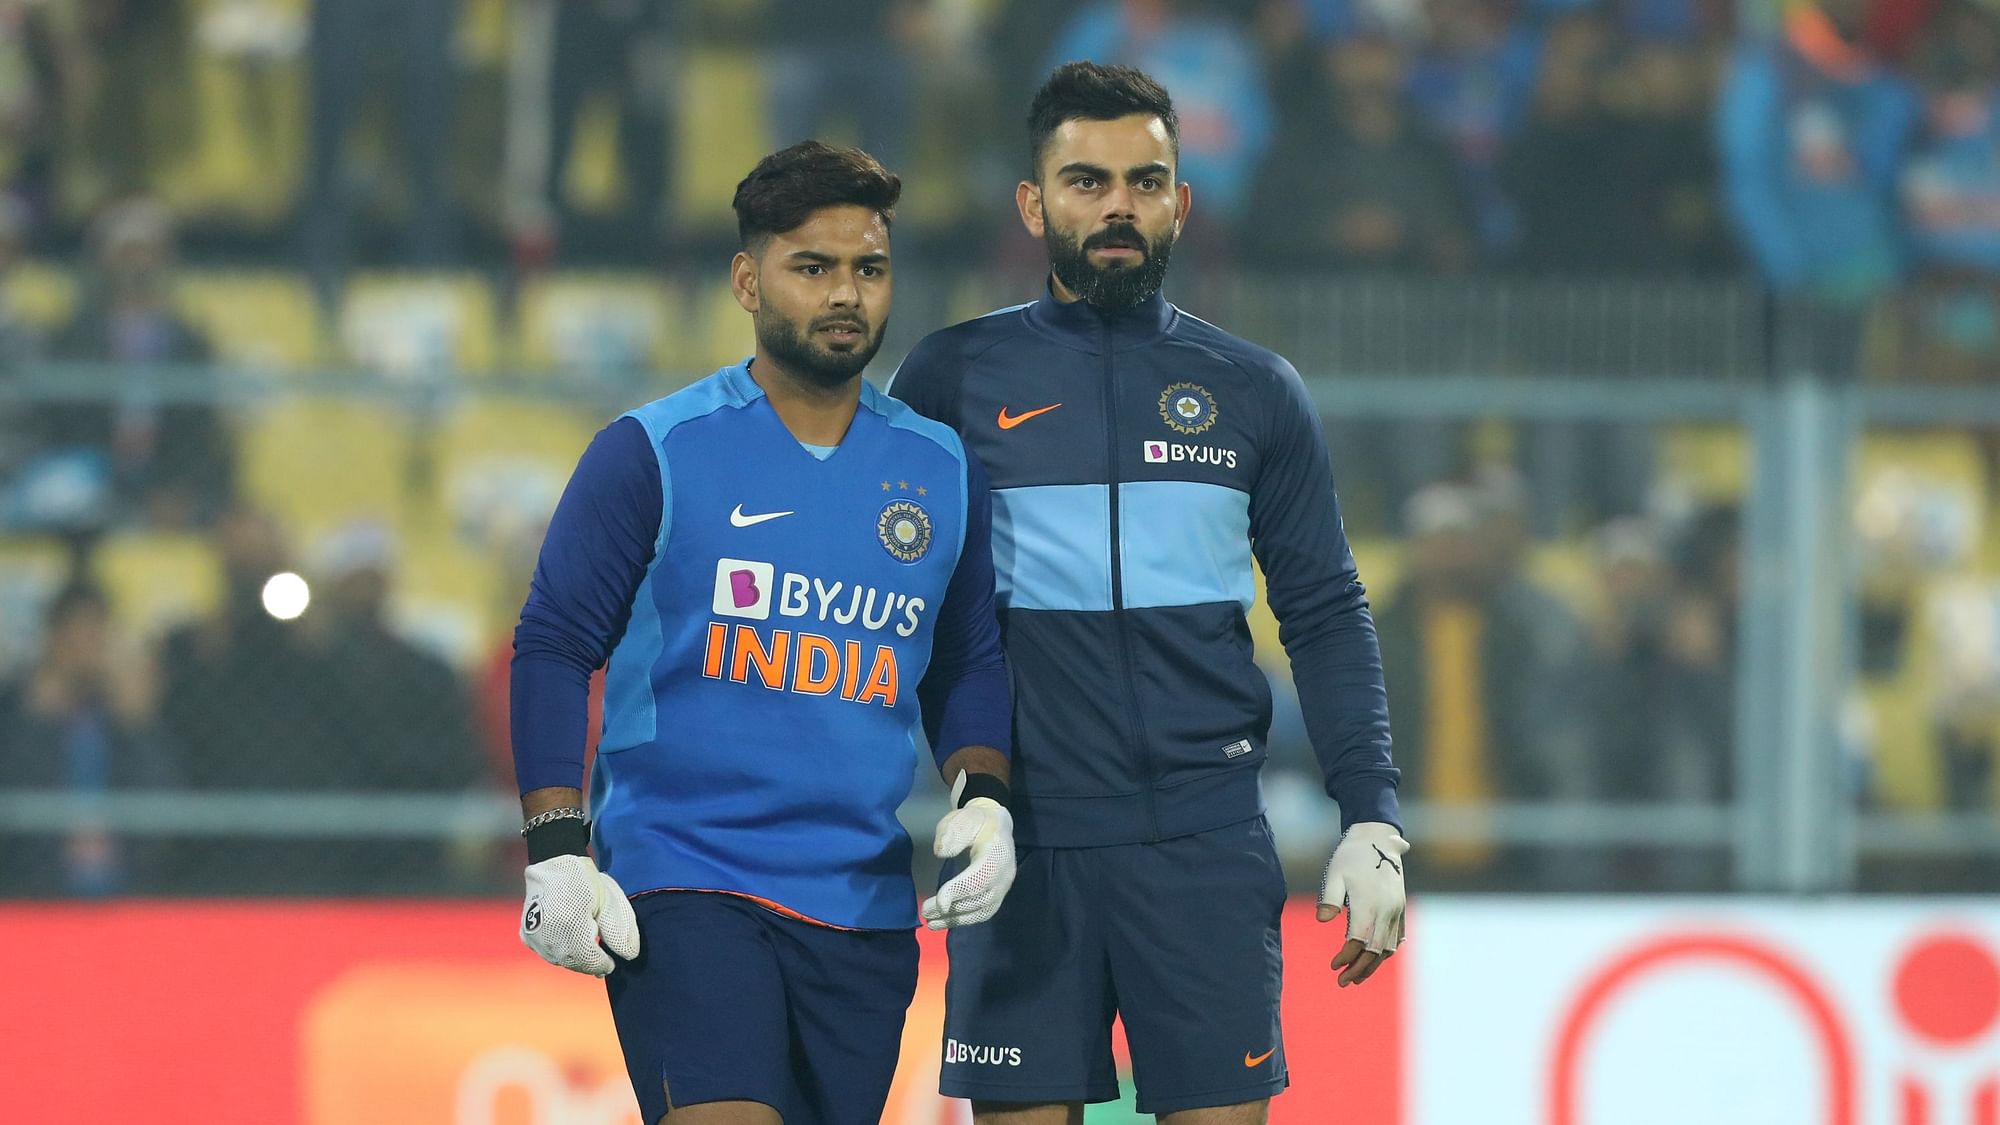 Parth Jindal, co-owner of Delhi Capitals, has questioned the exclusion of Rishabh Pant and Ravichandran Ashwin from India’s limited-over teams.